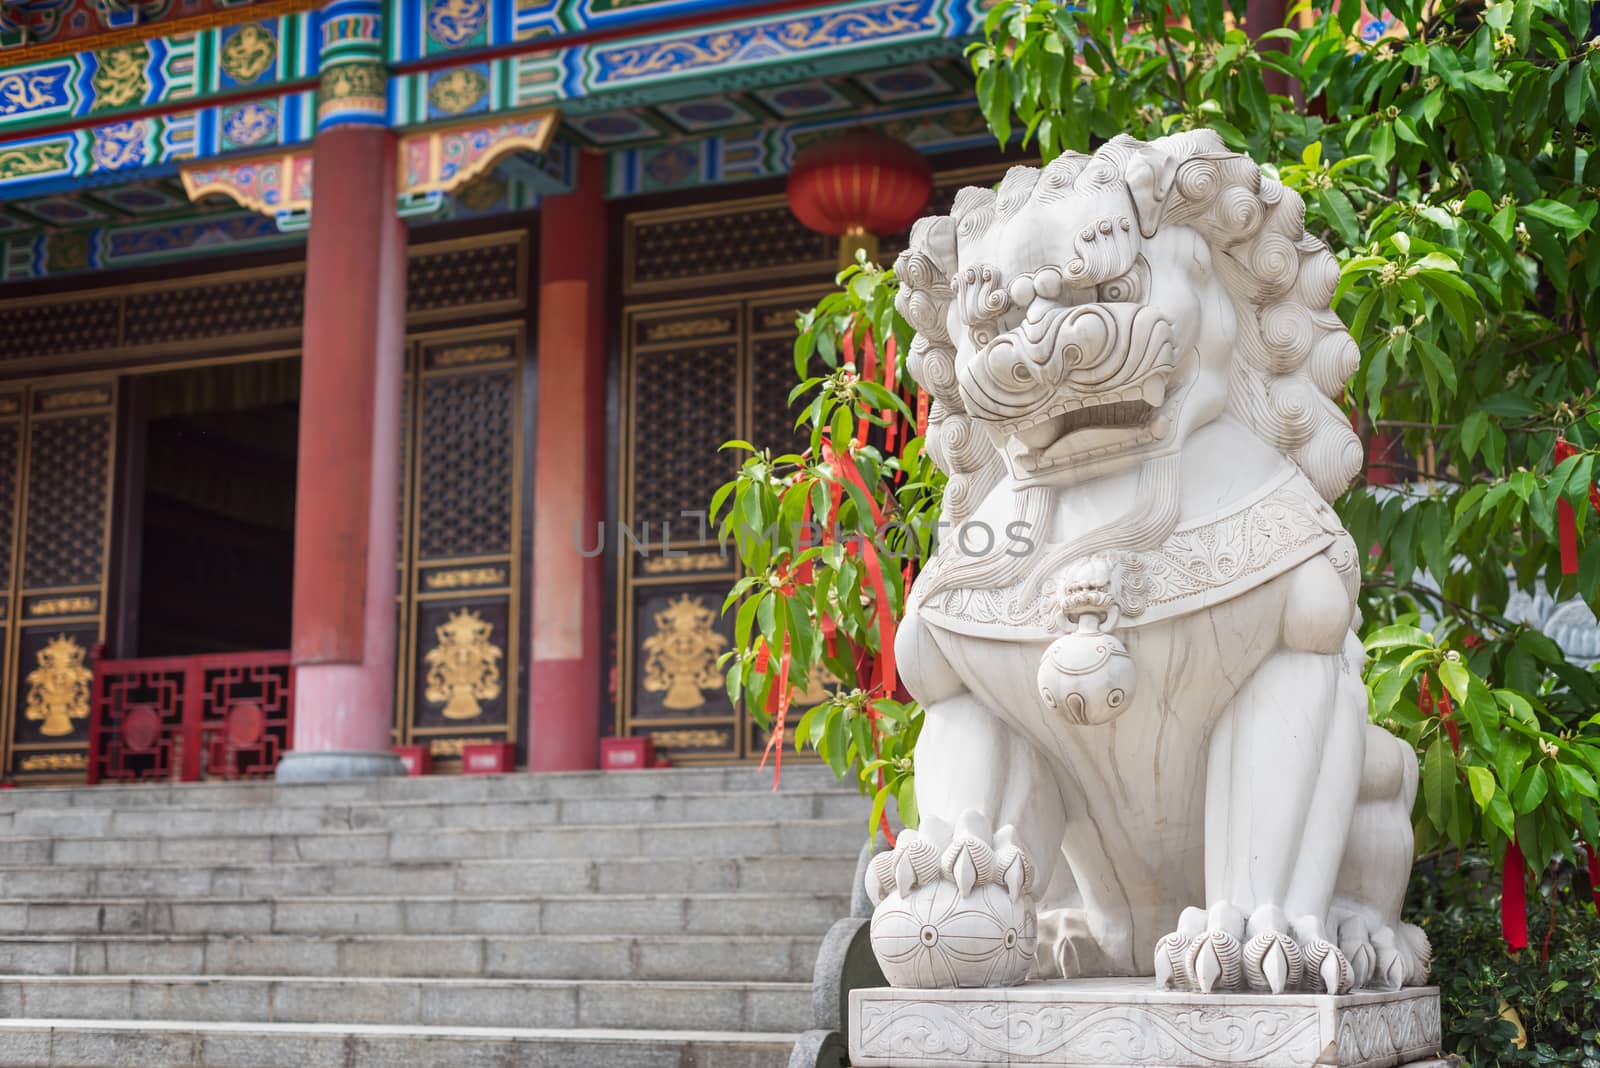 Lion white stone sculpture in a buddhist temple in Chengdu, China